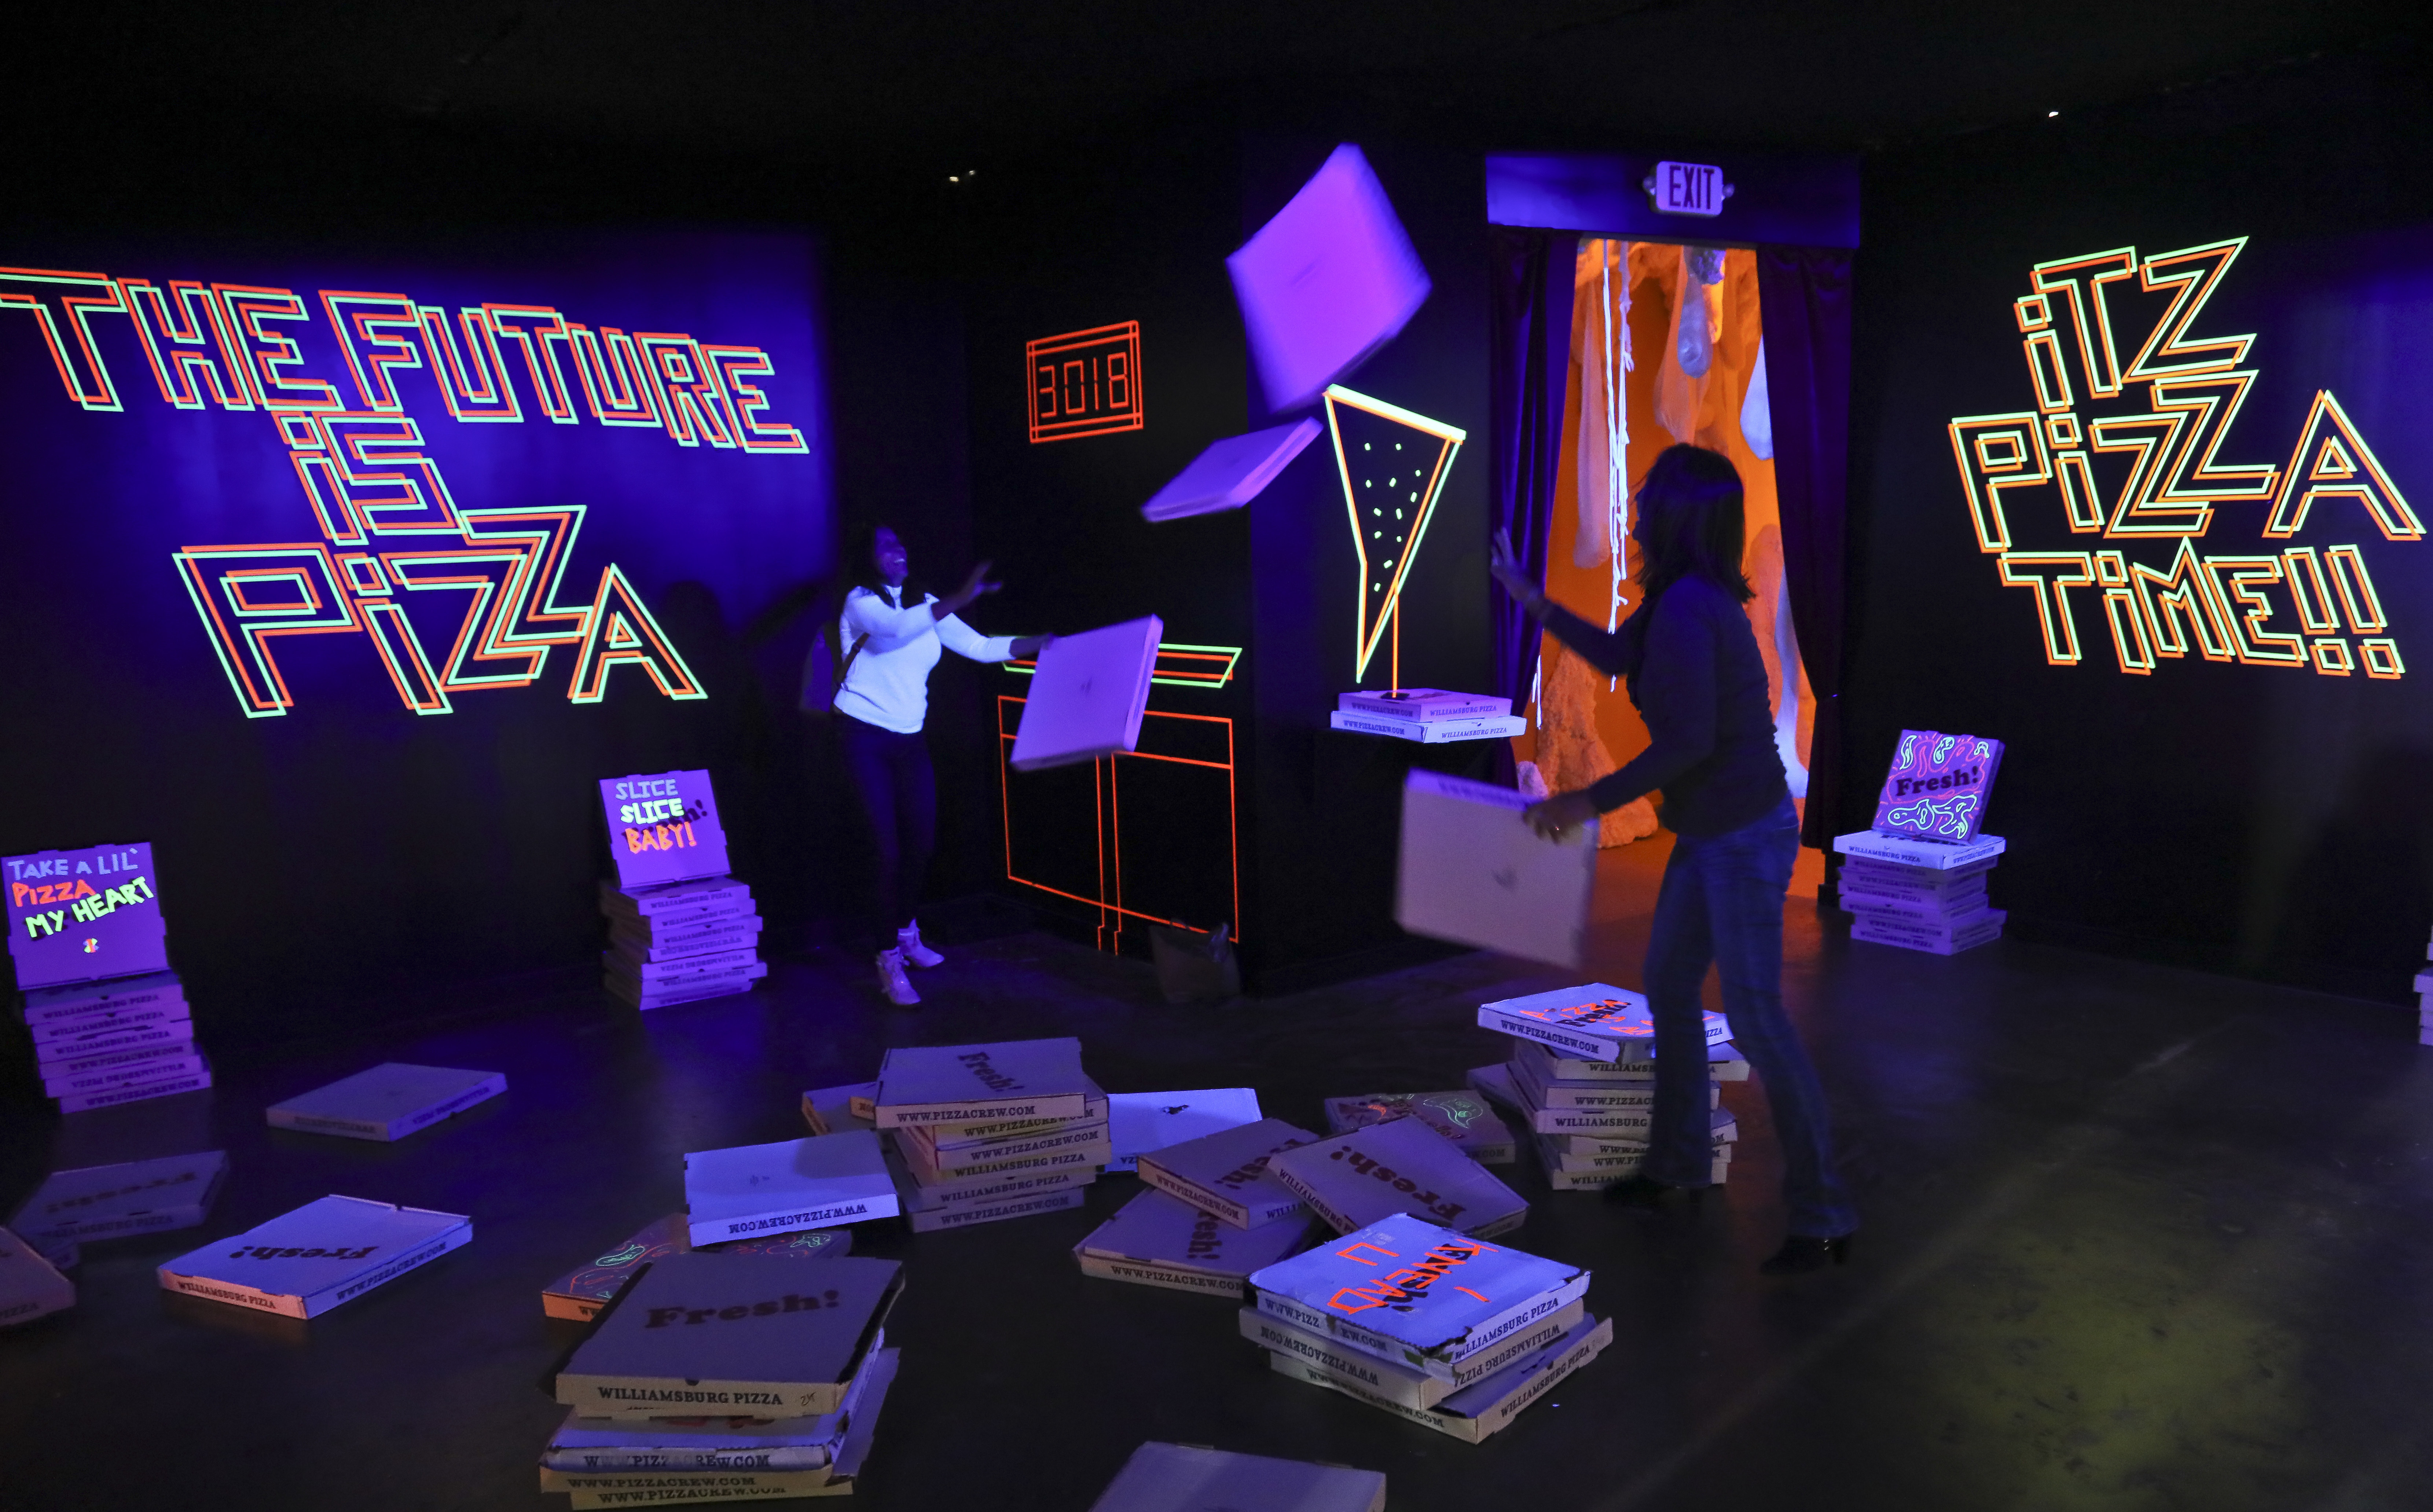 A pizza box playroom created with neon lights and colourful fluorescent tape called Gazoo, part of a group art exhibition celebrating pizza at The Museum of Pizza in New York